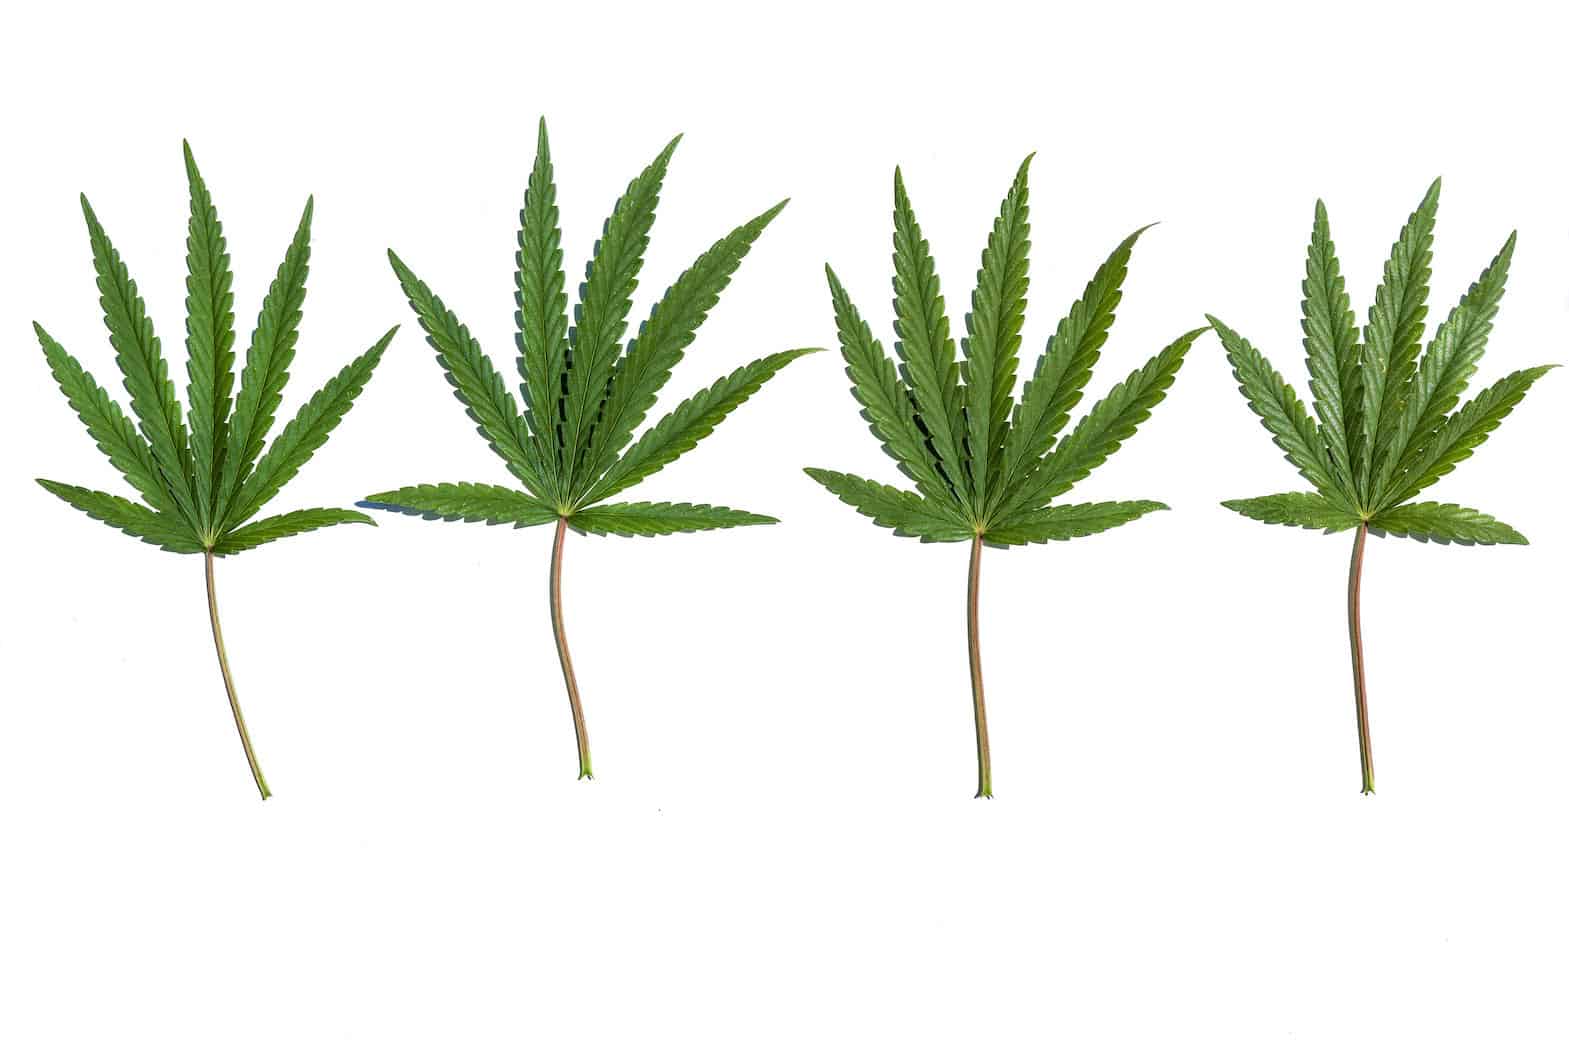 Close-up collection of four cannabis leaves on white background, types of cannabis